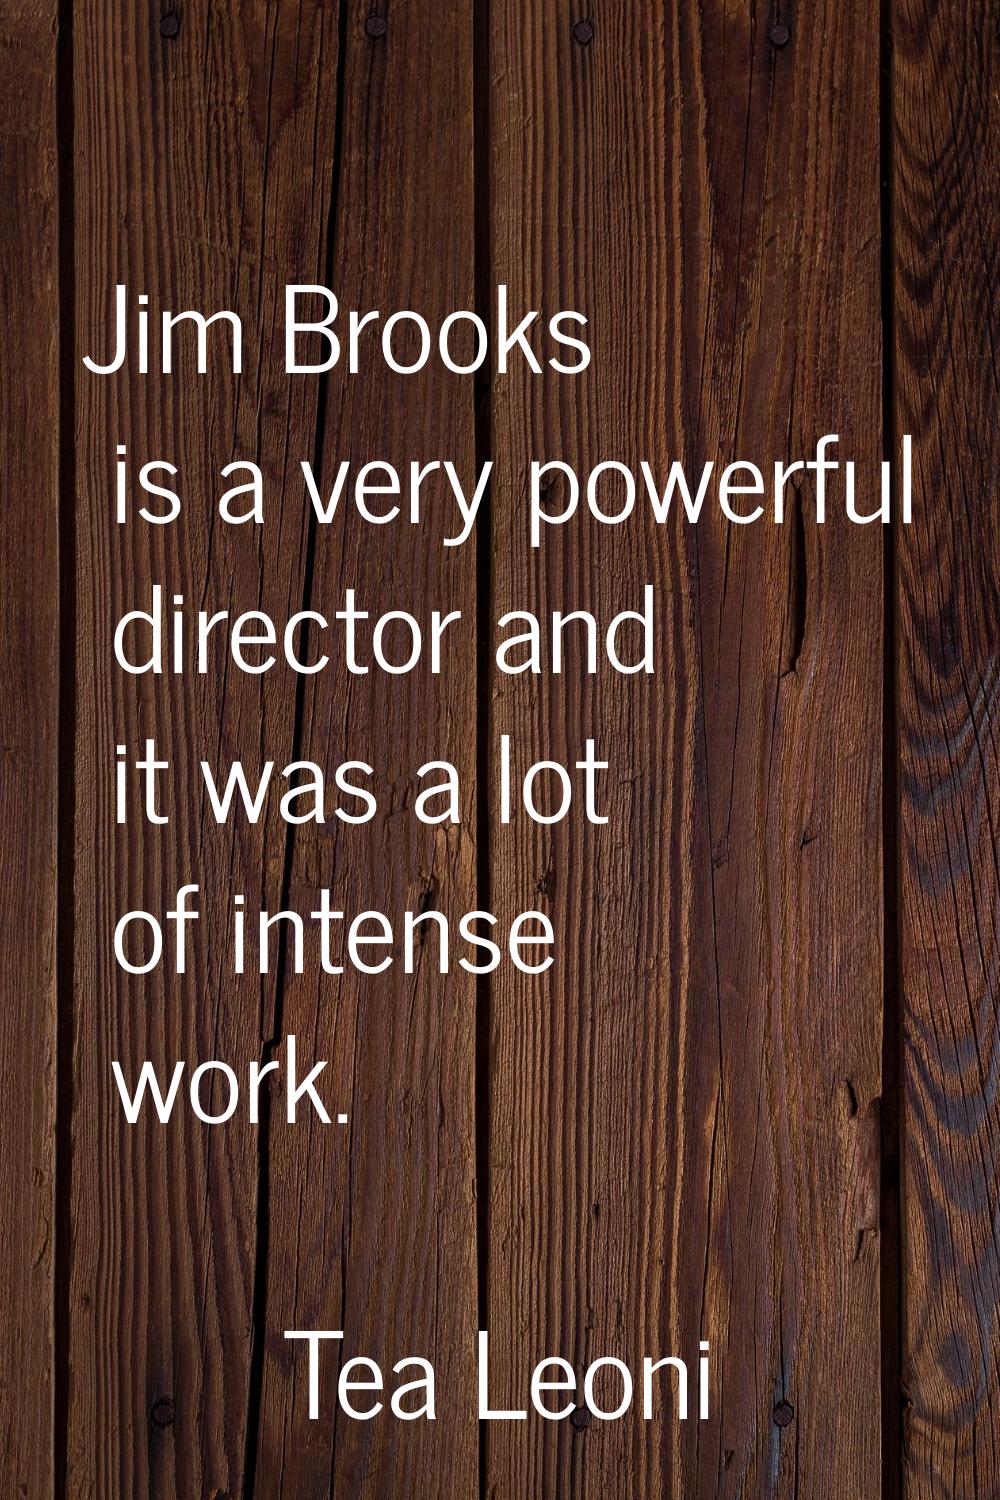 Jim Brooks is a very powerful director and it was a lot of intense work.